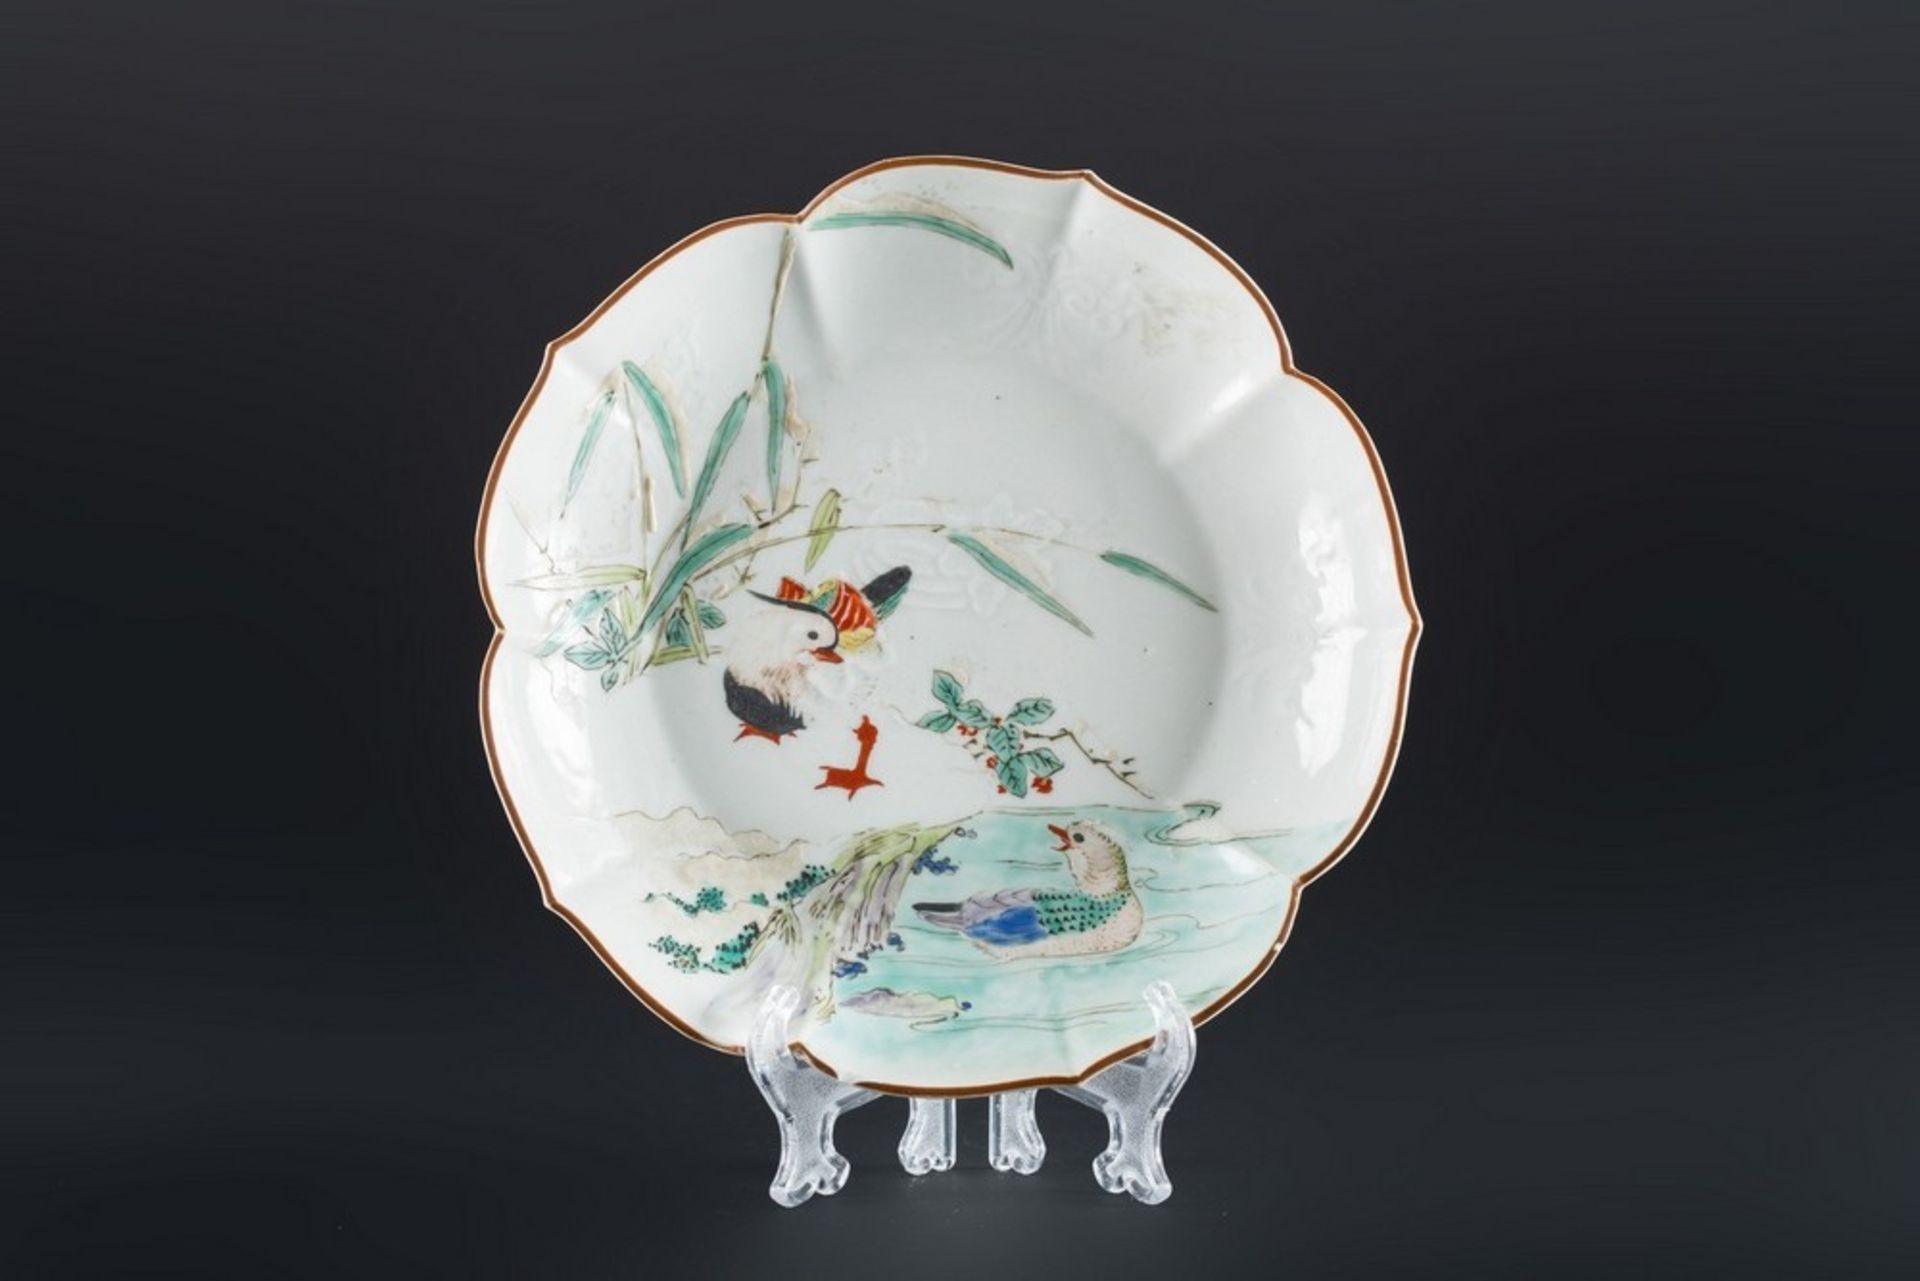 ARTE GIAPPONESE An enameled porcelain dish painted with a pond with ducksJapan, 19th century .